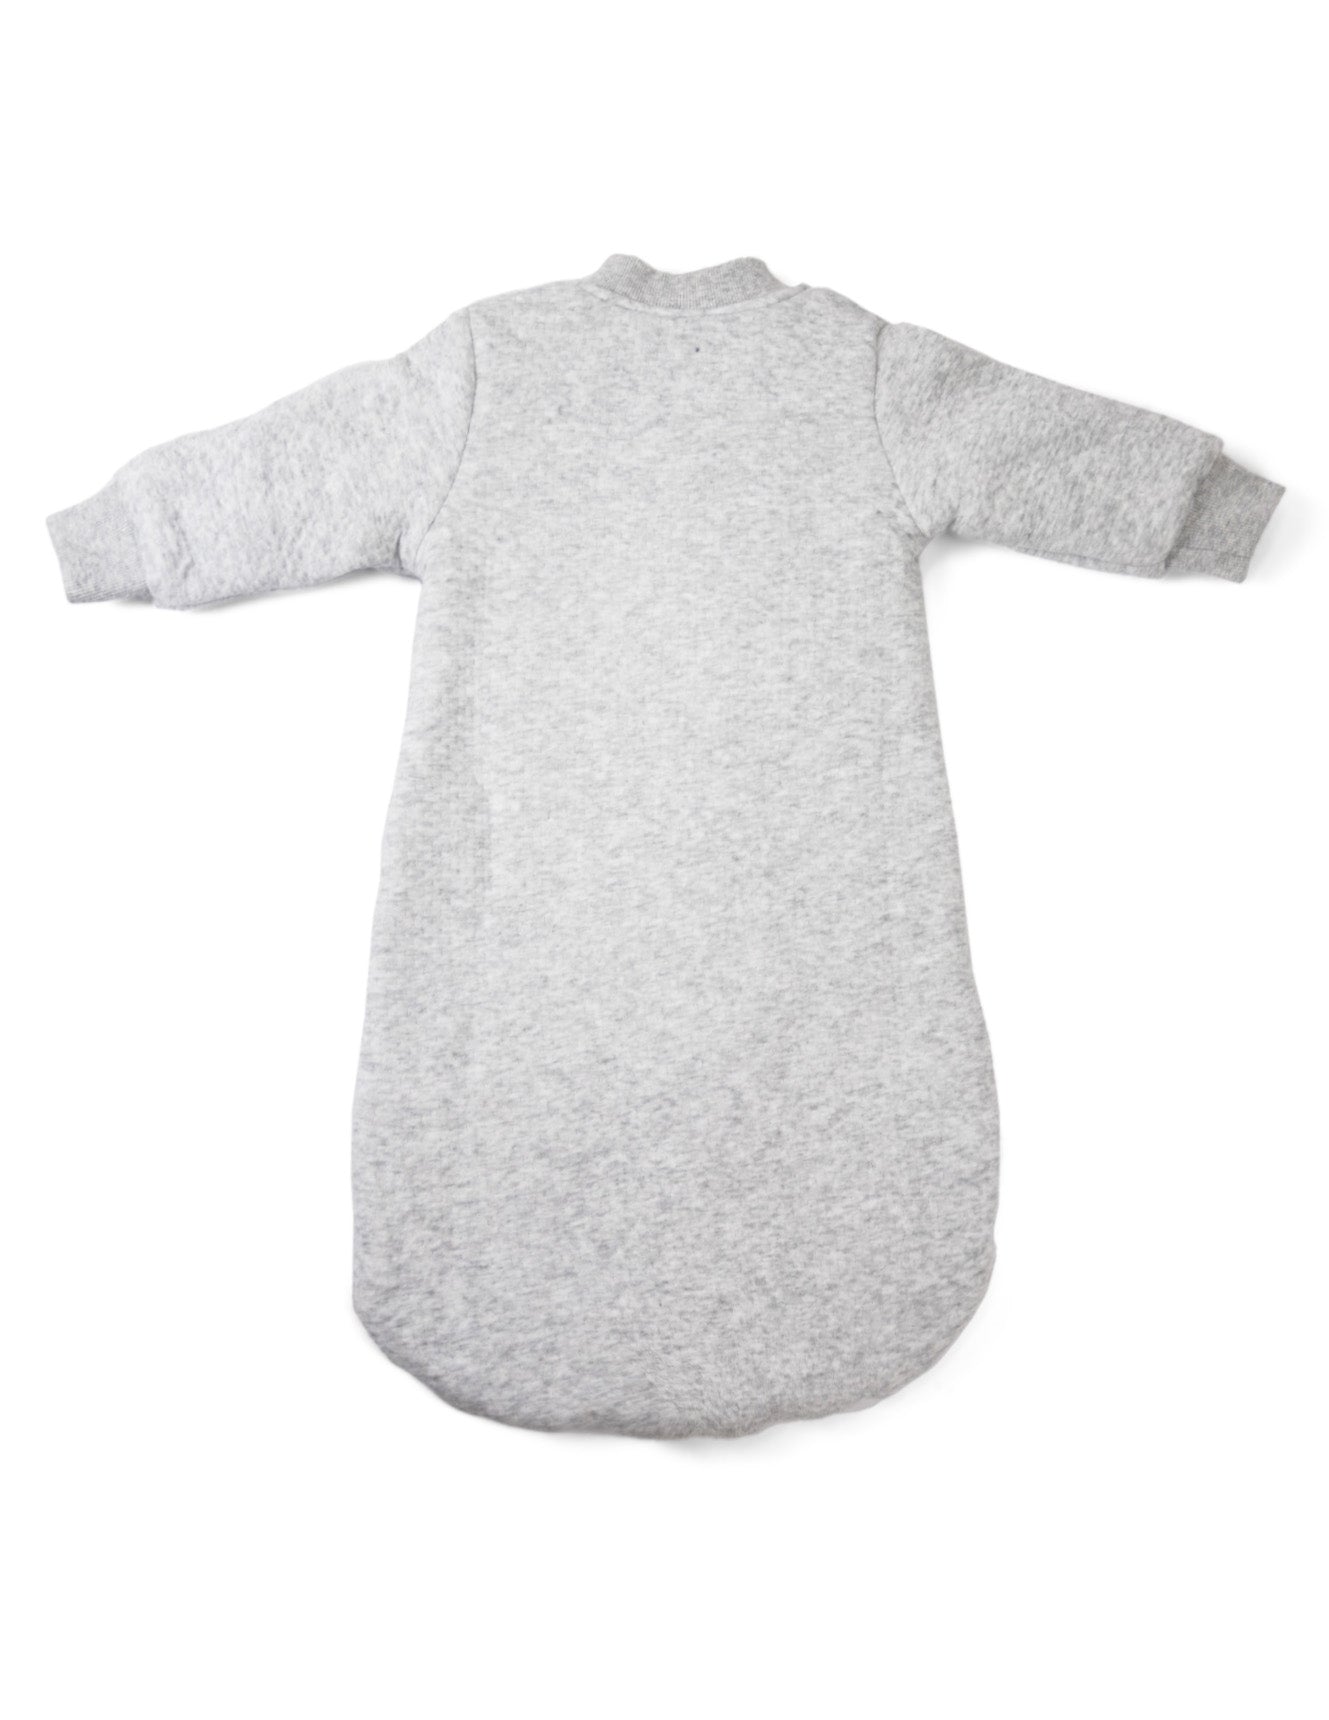 sleeping bag with arms cotton 3.0 TOG - grey marle/grey lines